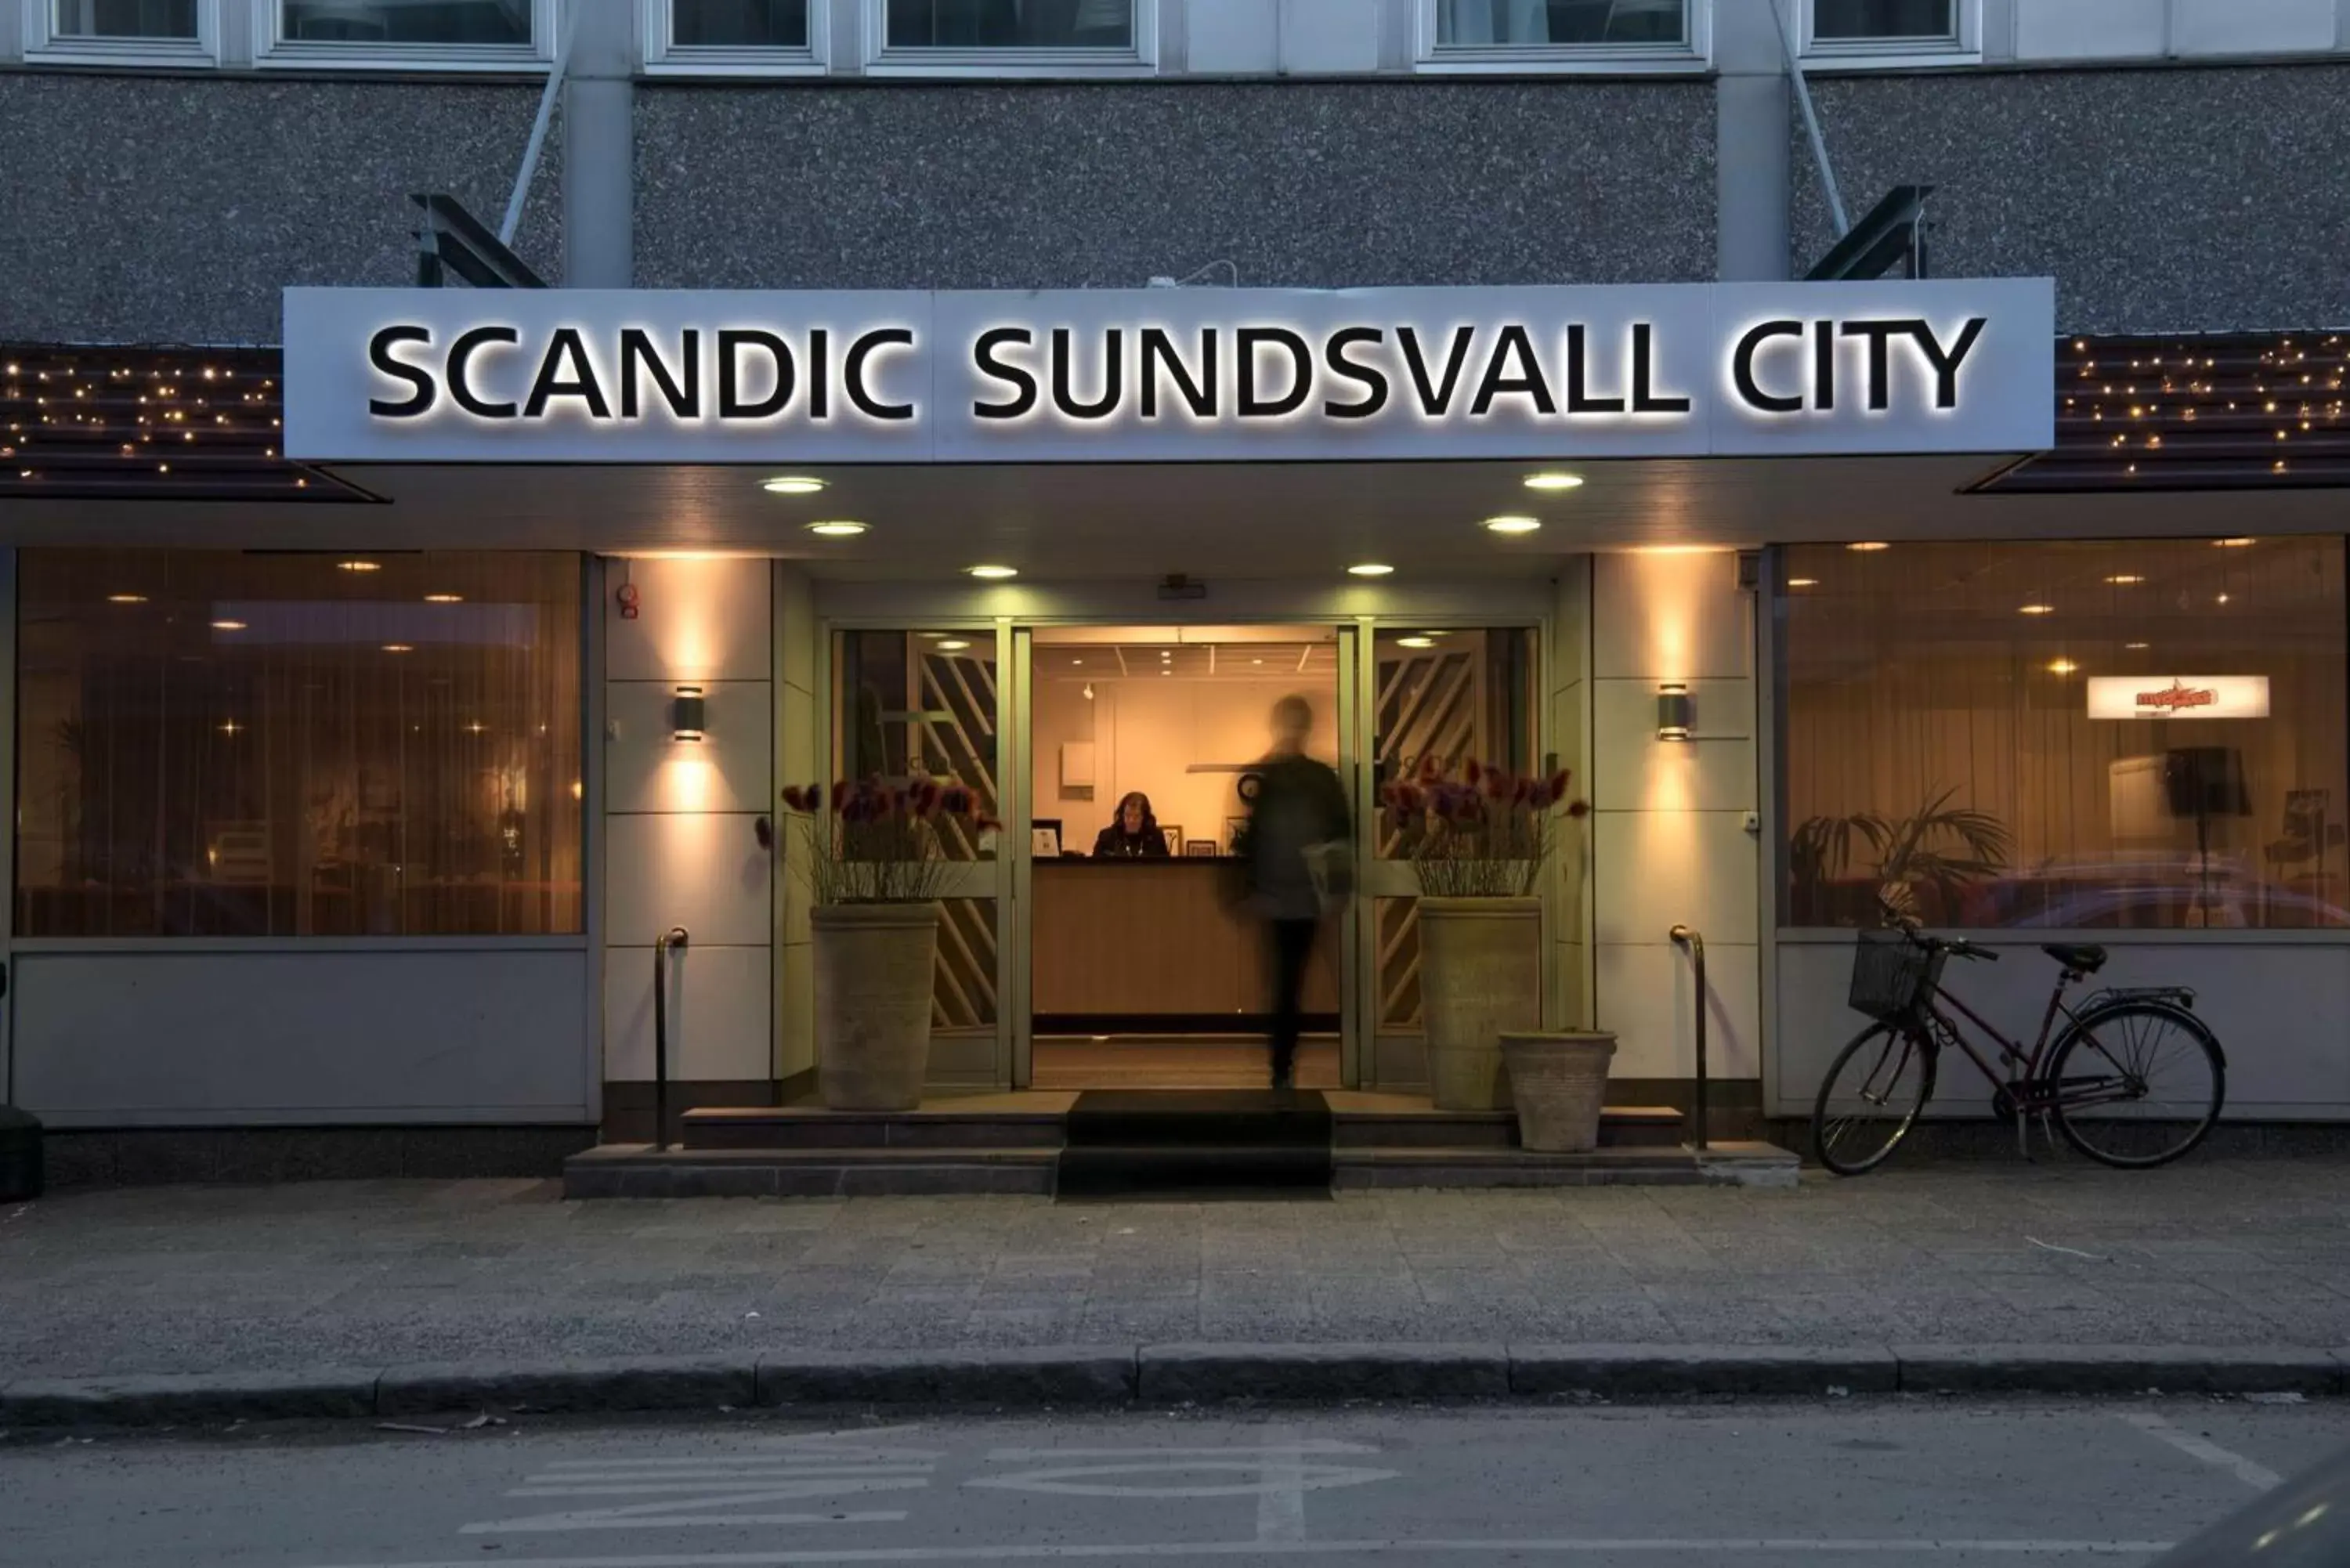 Property building in Scandic Sundsvall City